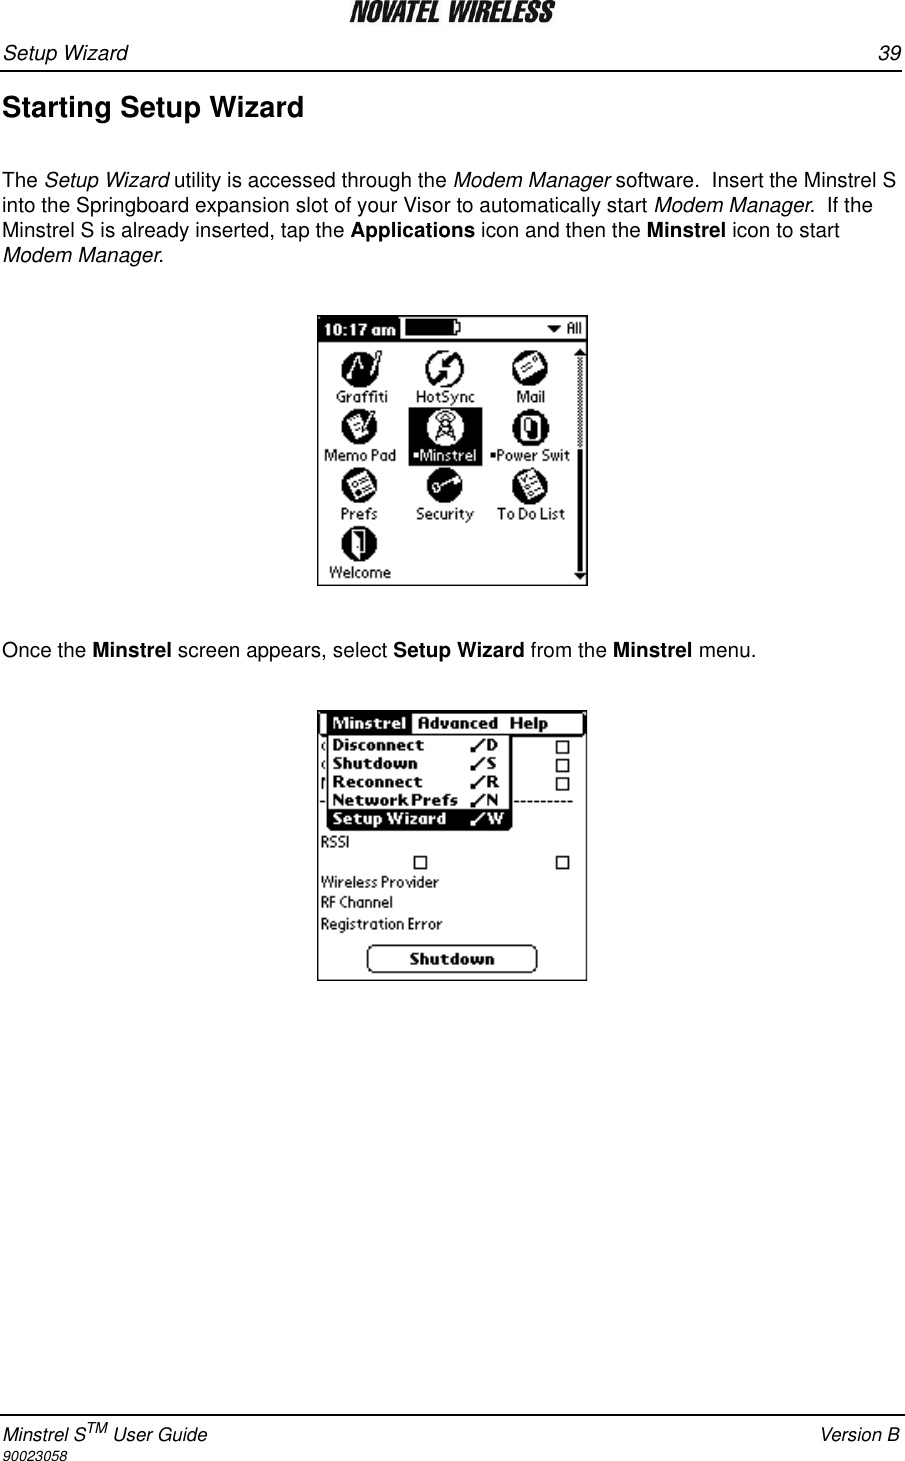 Setup Wizard 39Minstrel STM User Guide Version B90023058Starting Setup WizardThe Setup Wizard utility is accessed through the Modem Manager software.  Insert the Minstrel S into the Springboard expansion slot of your Visor to automatically start Modem Manager.  If the Minstrel S is already inserted, tap the Applications icon and then the Minstrel icon to start Modem Manager.Once the Minstrel screen appears, select Setup Wizard from the Minstrel menu.